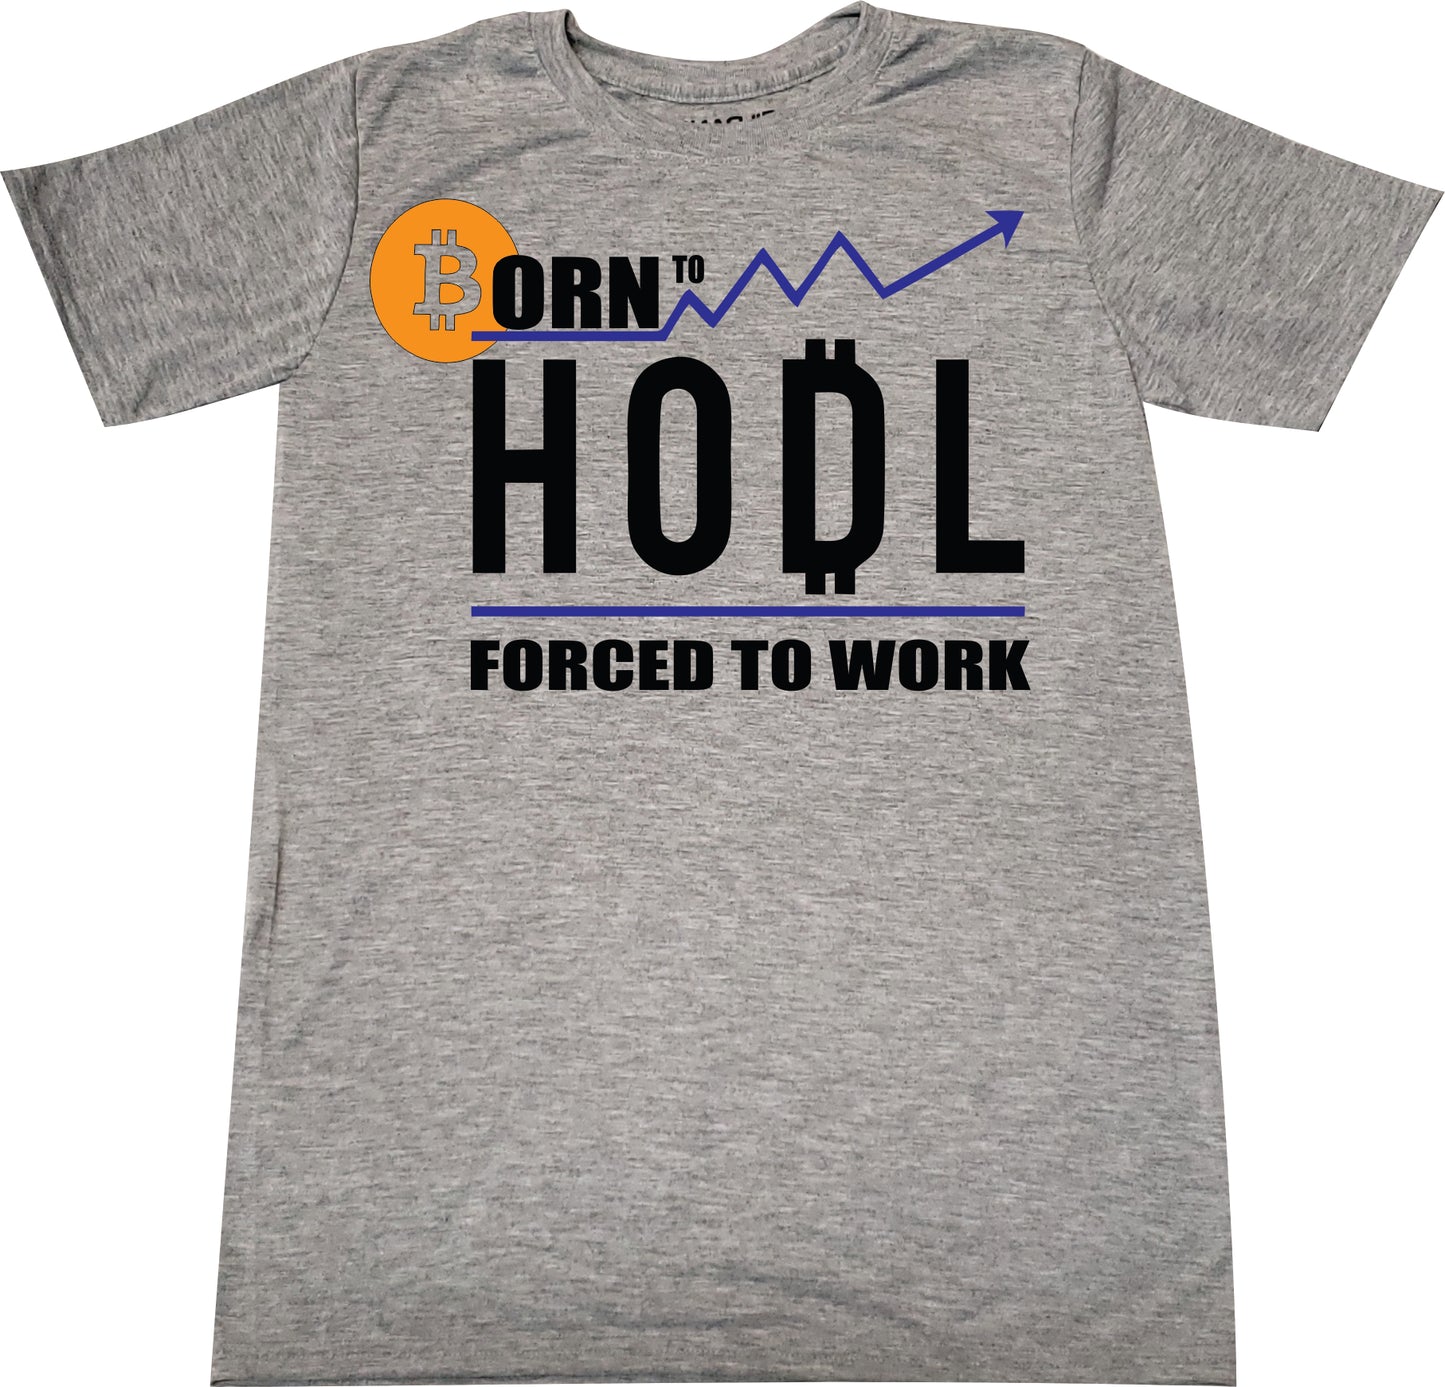 Born to HODL forced to work Bitcoin/Litecoin tshirt